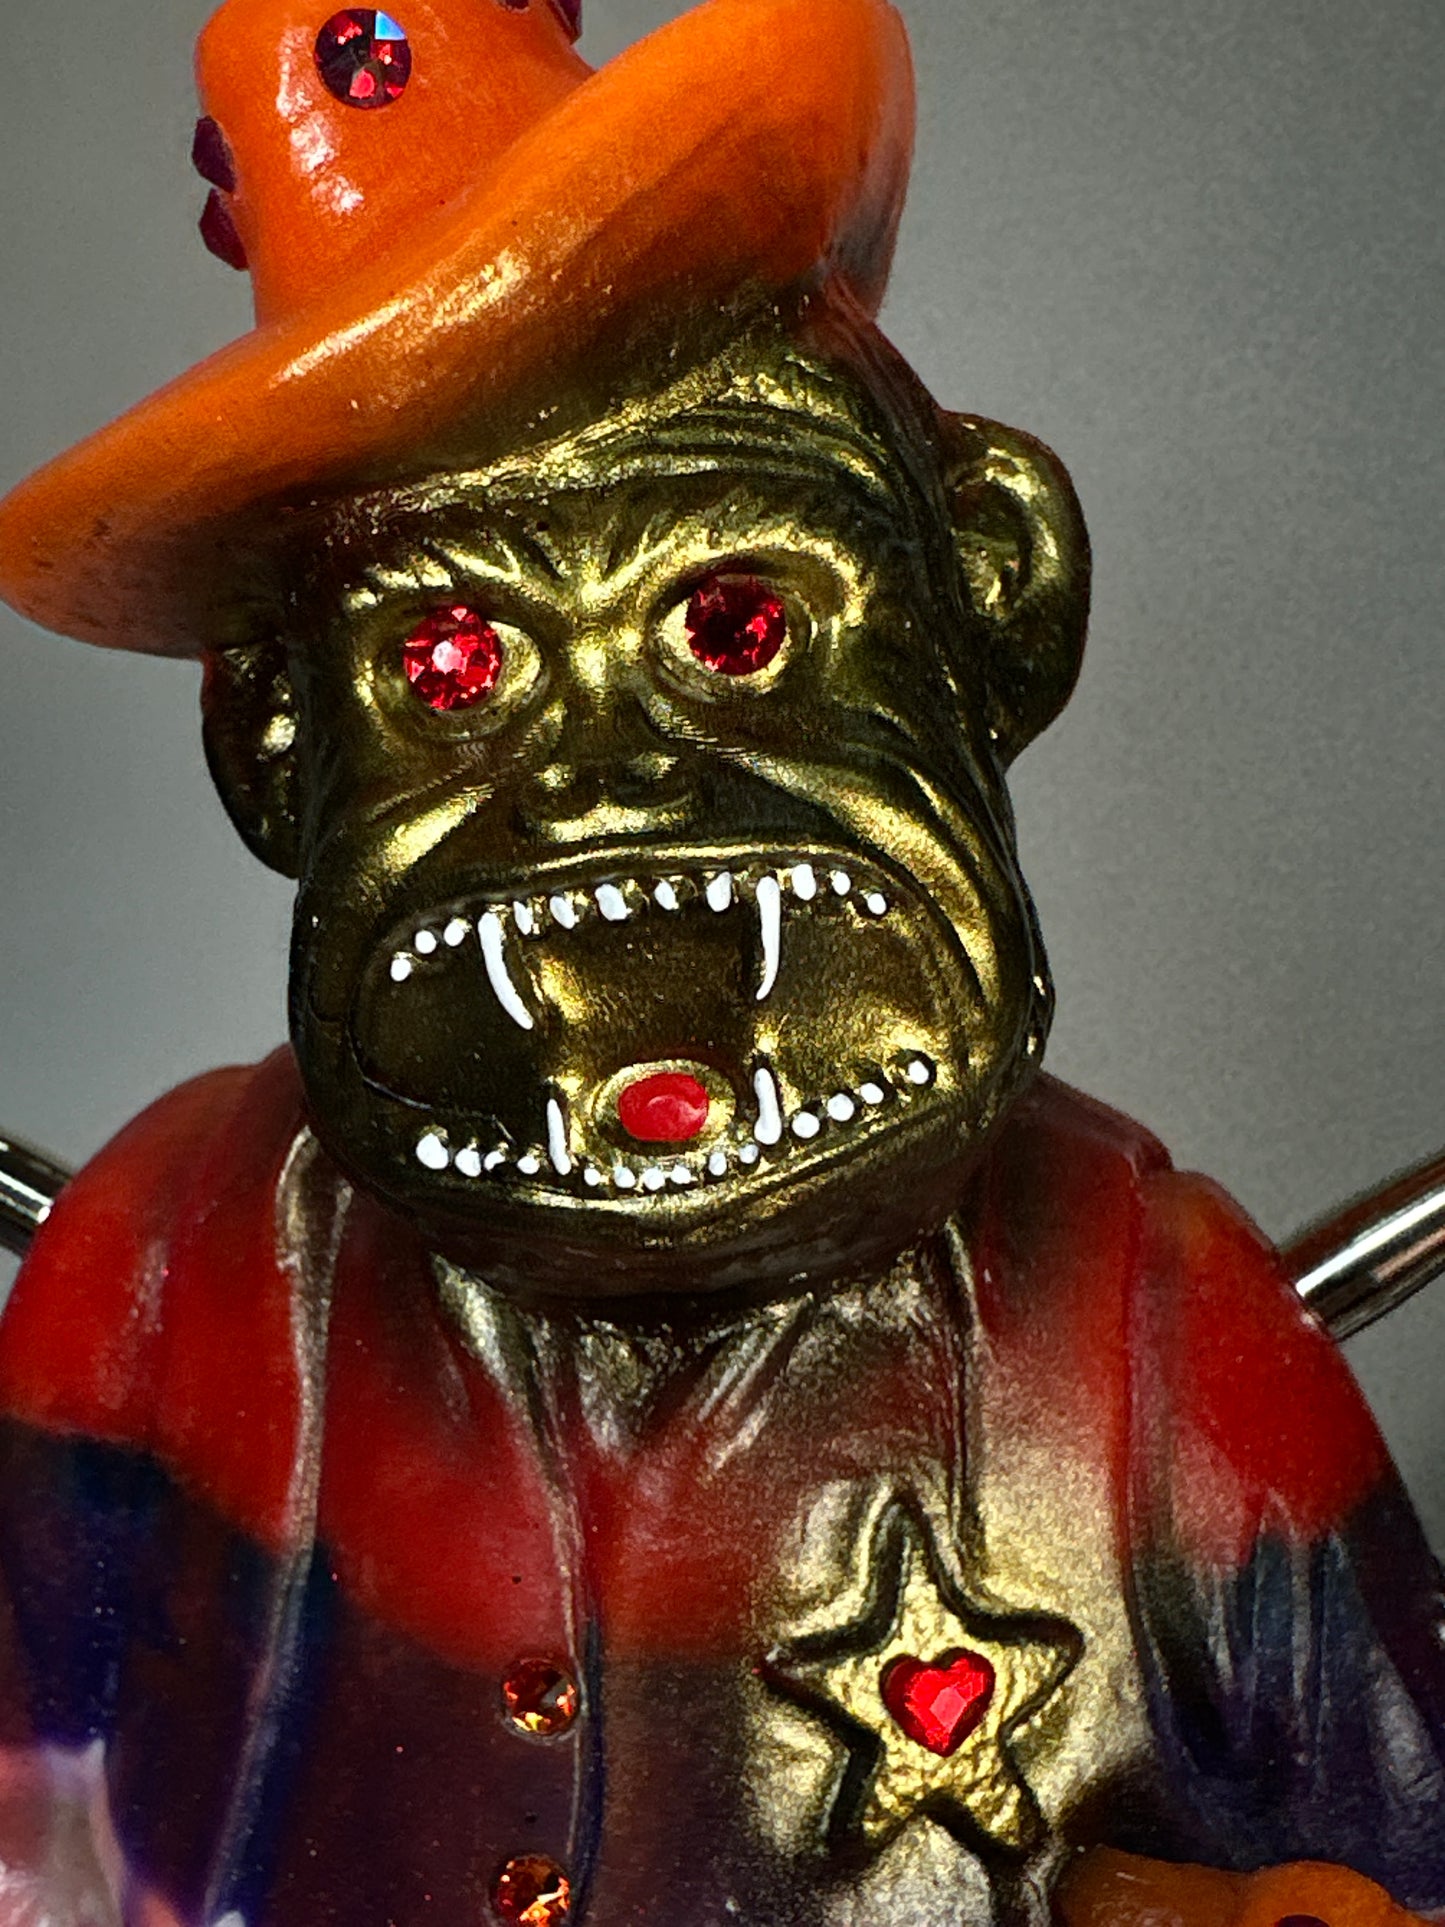 Deputy Ape: The Guardian at the Gates of Hell